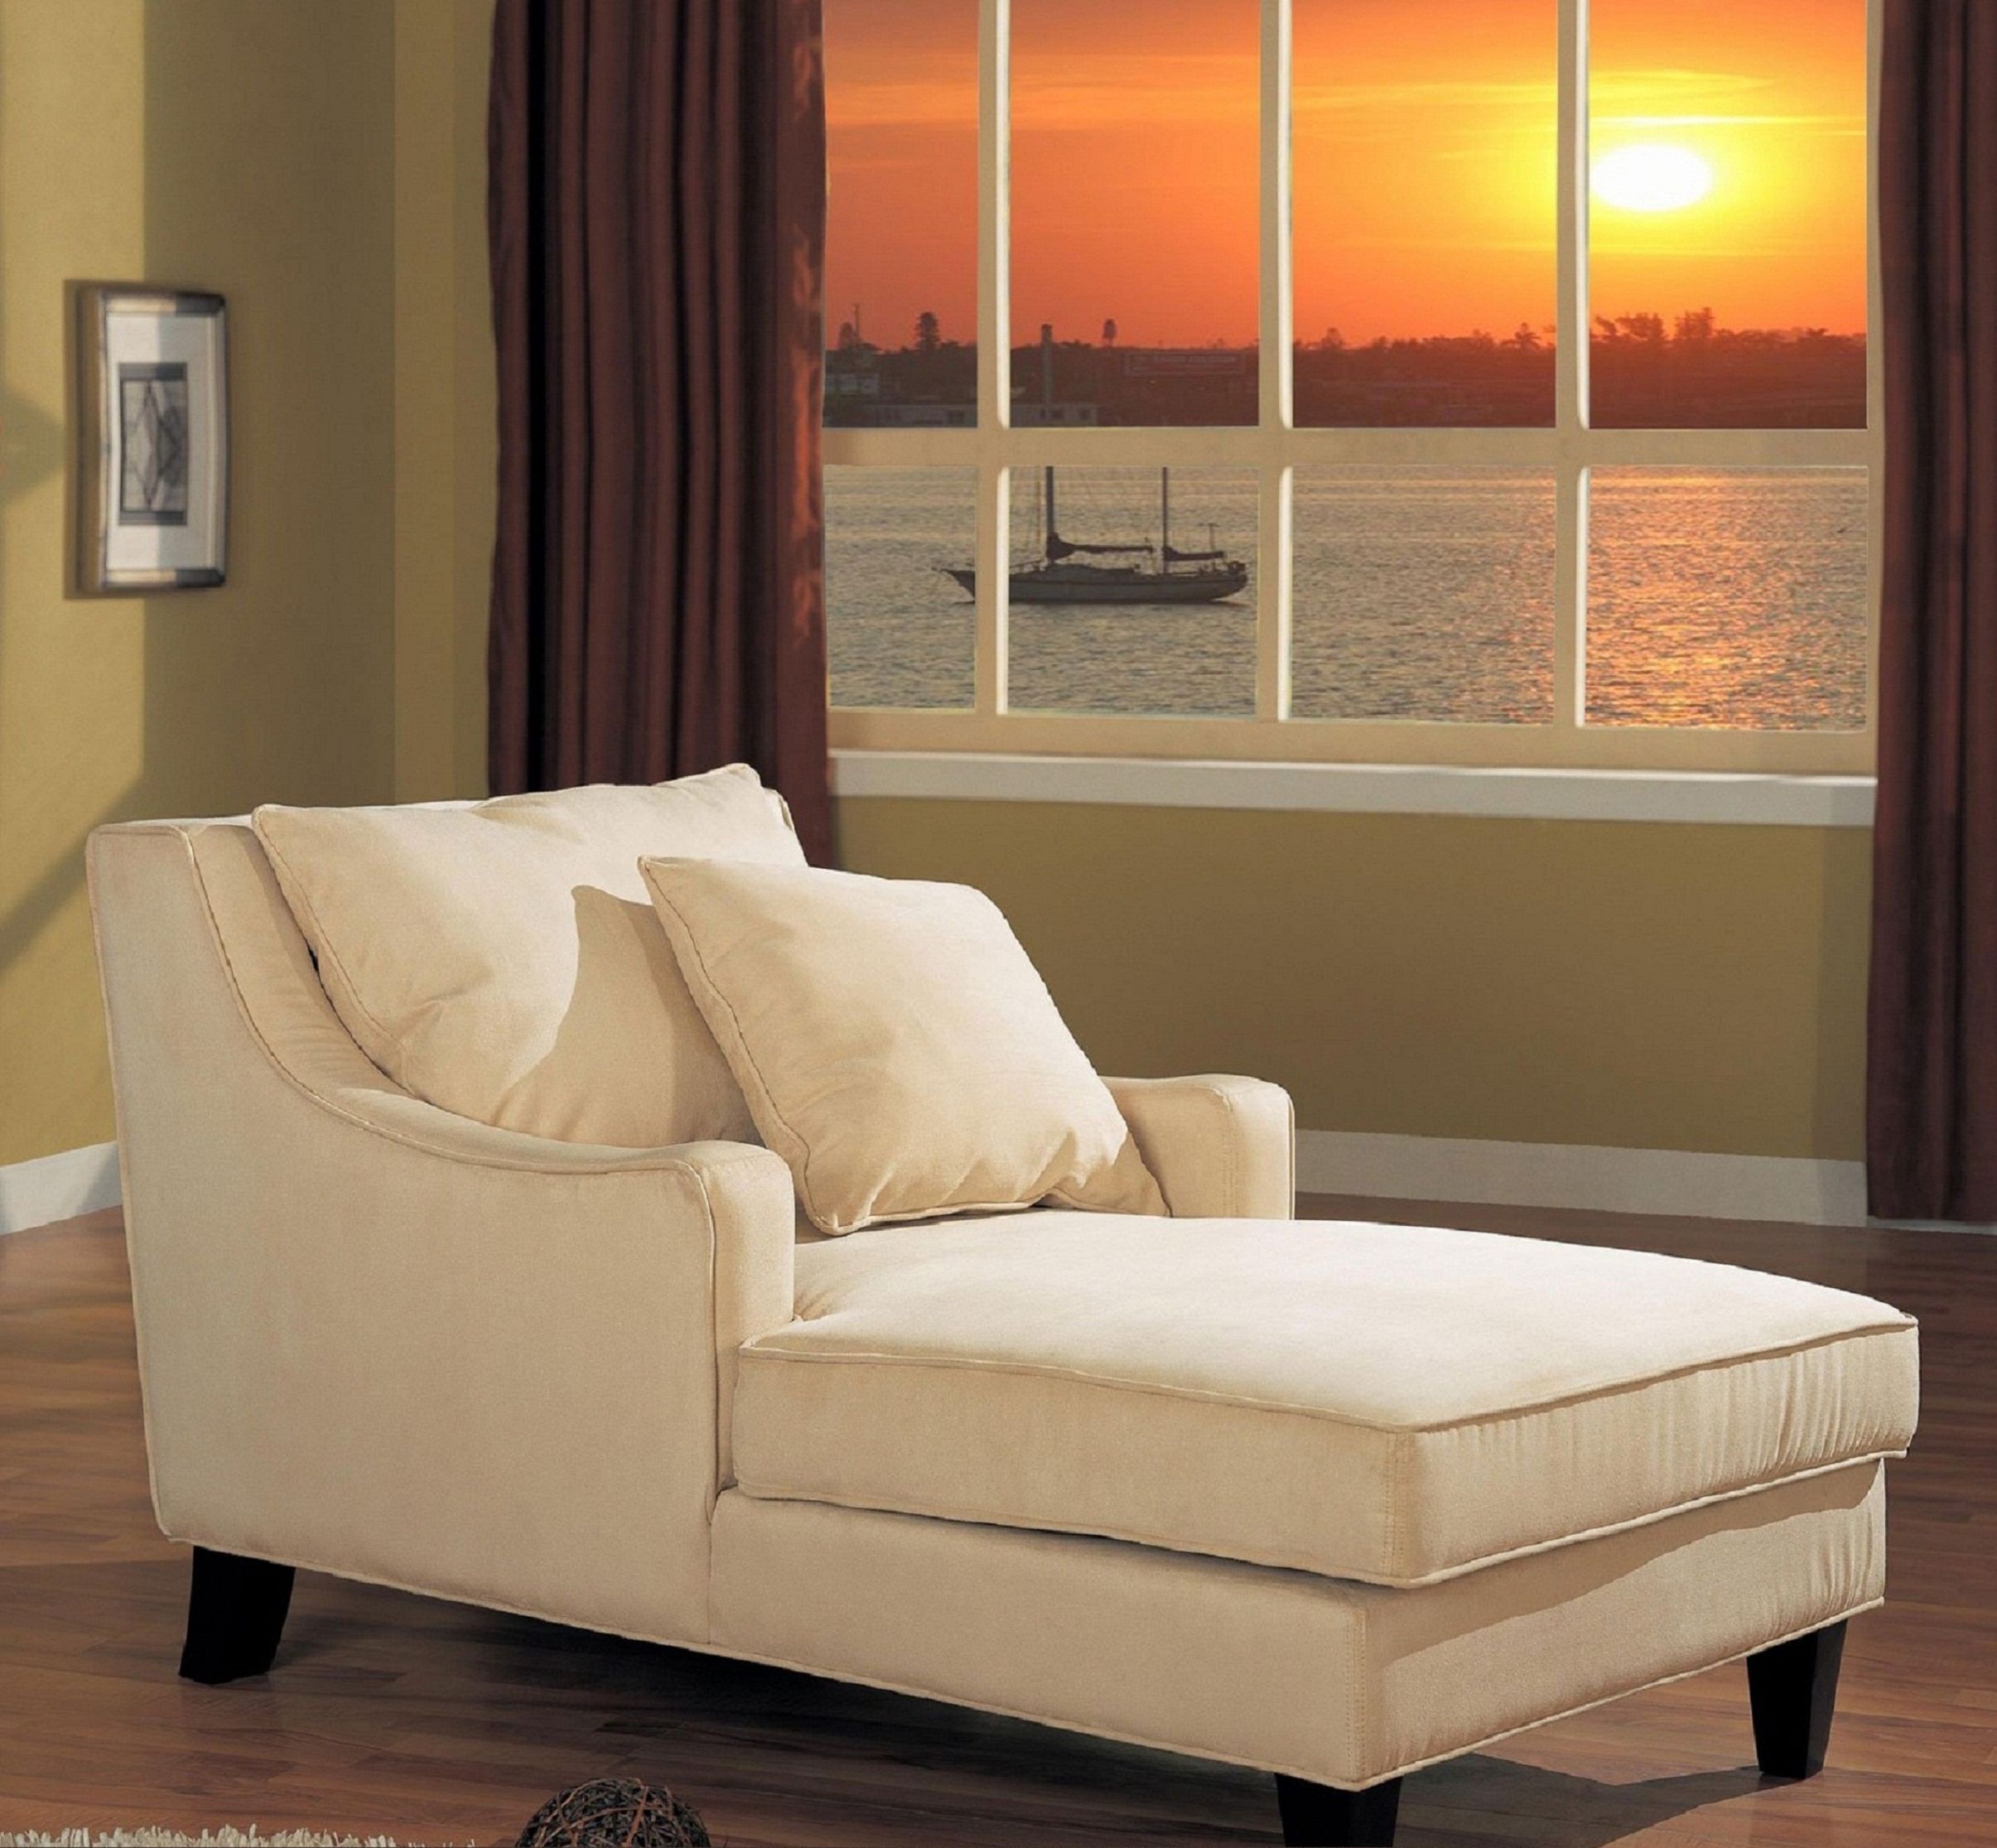 Wide Beige Upholstered Chaise Lounge With Arm And Cushion Having With Regard To Trendy Wide Chaise Lounges (View 11 of 15)